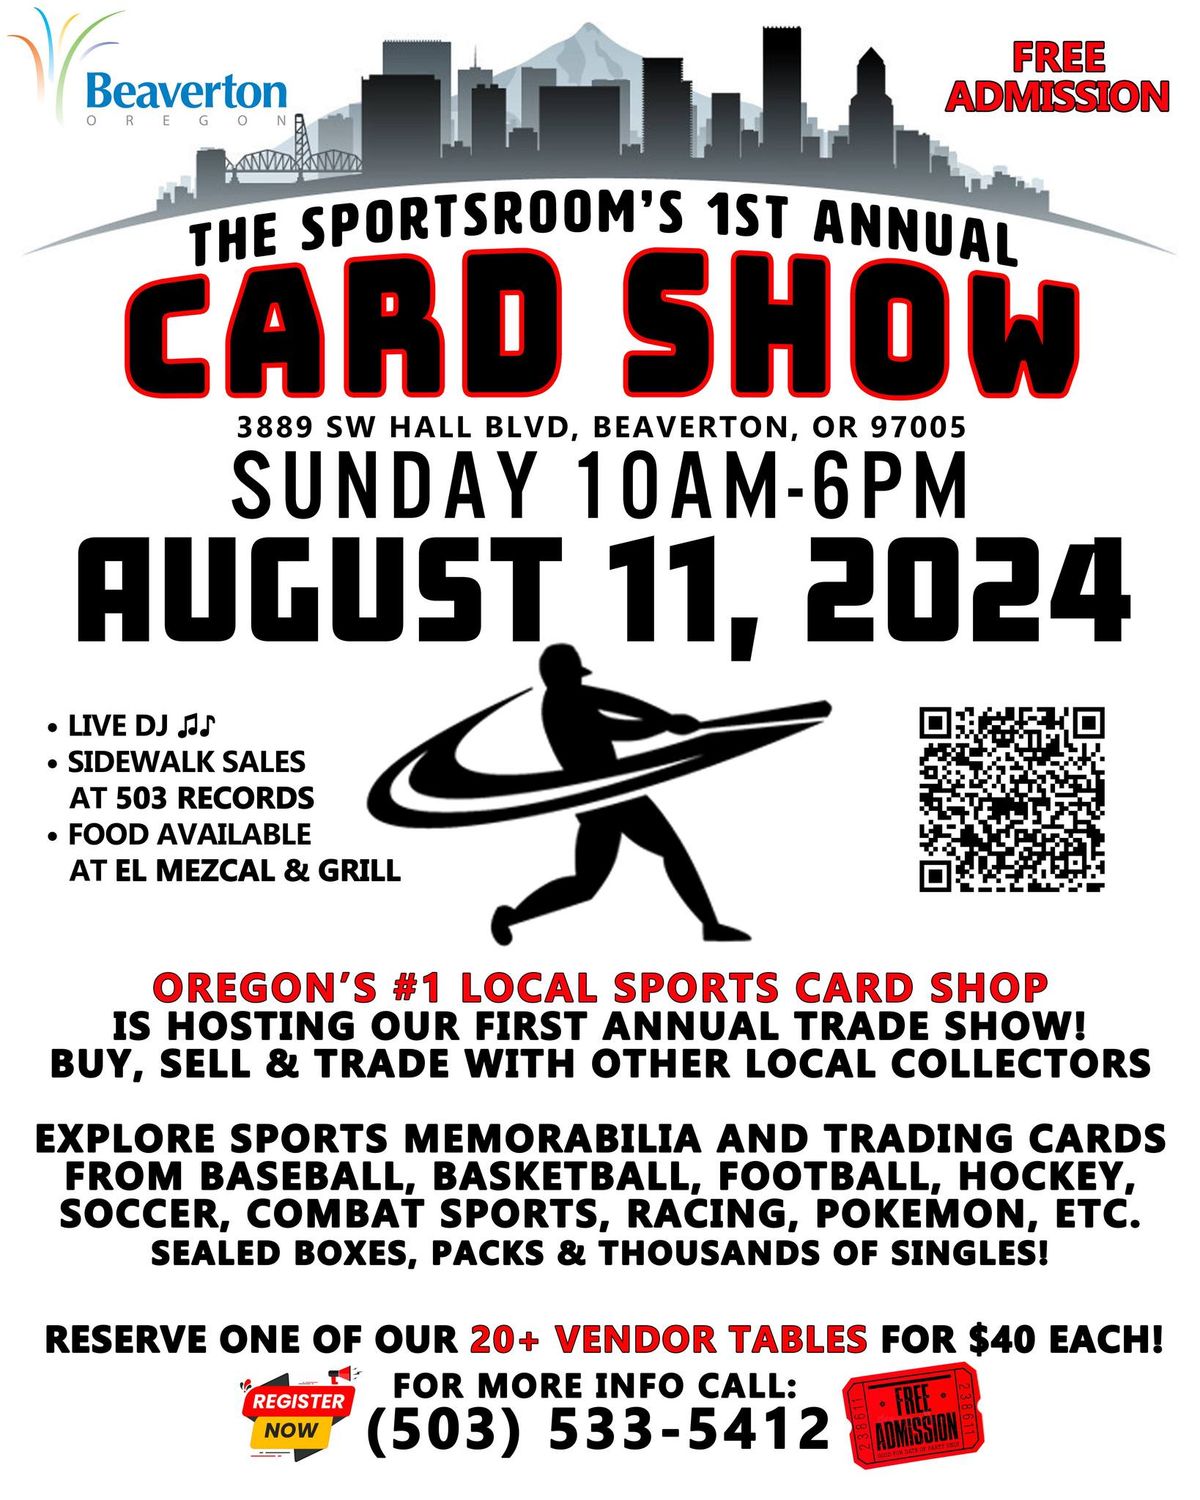 1st Annual CARD SHOW at The SportsRoom